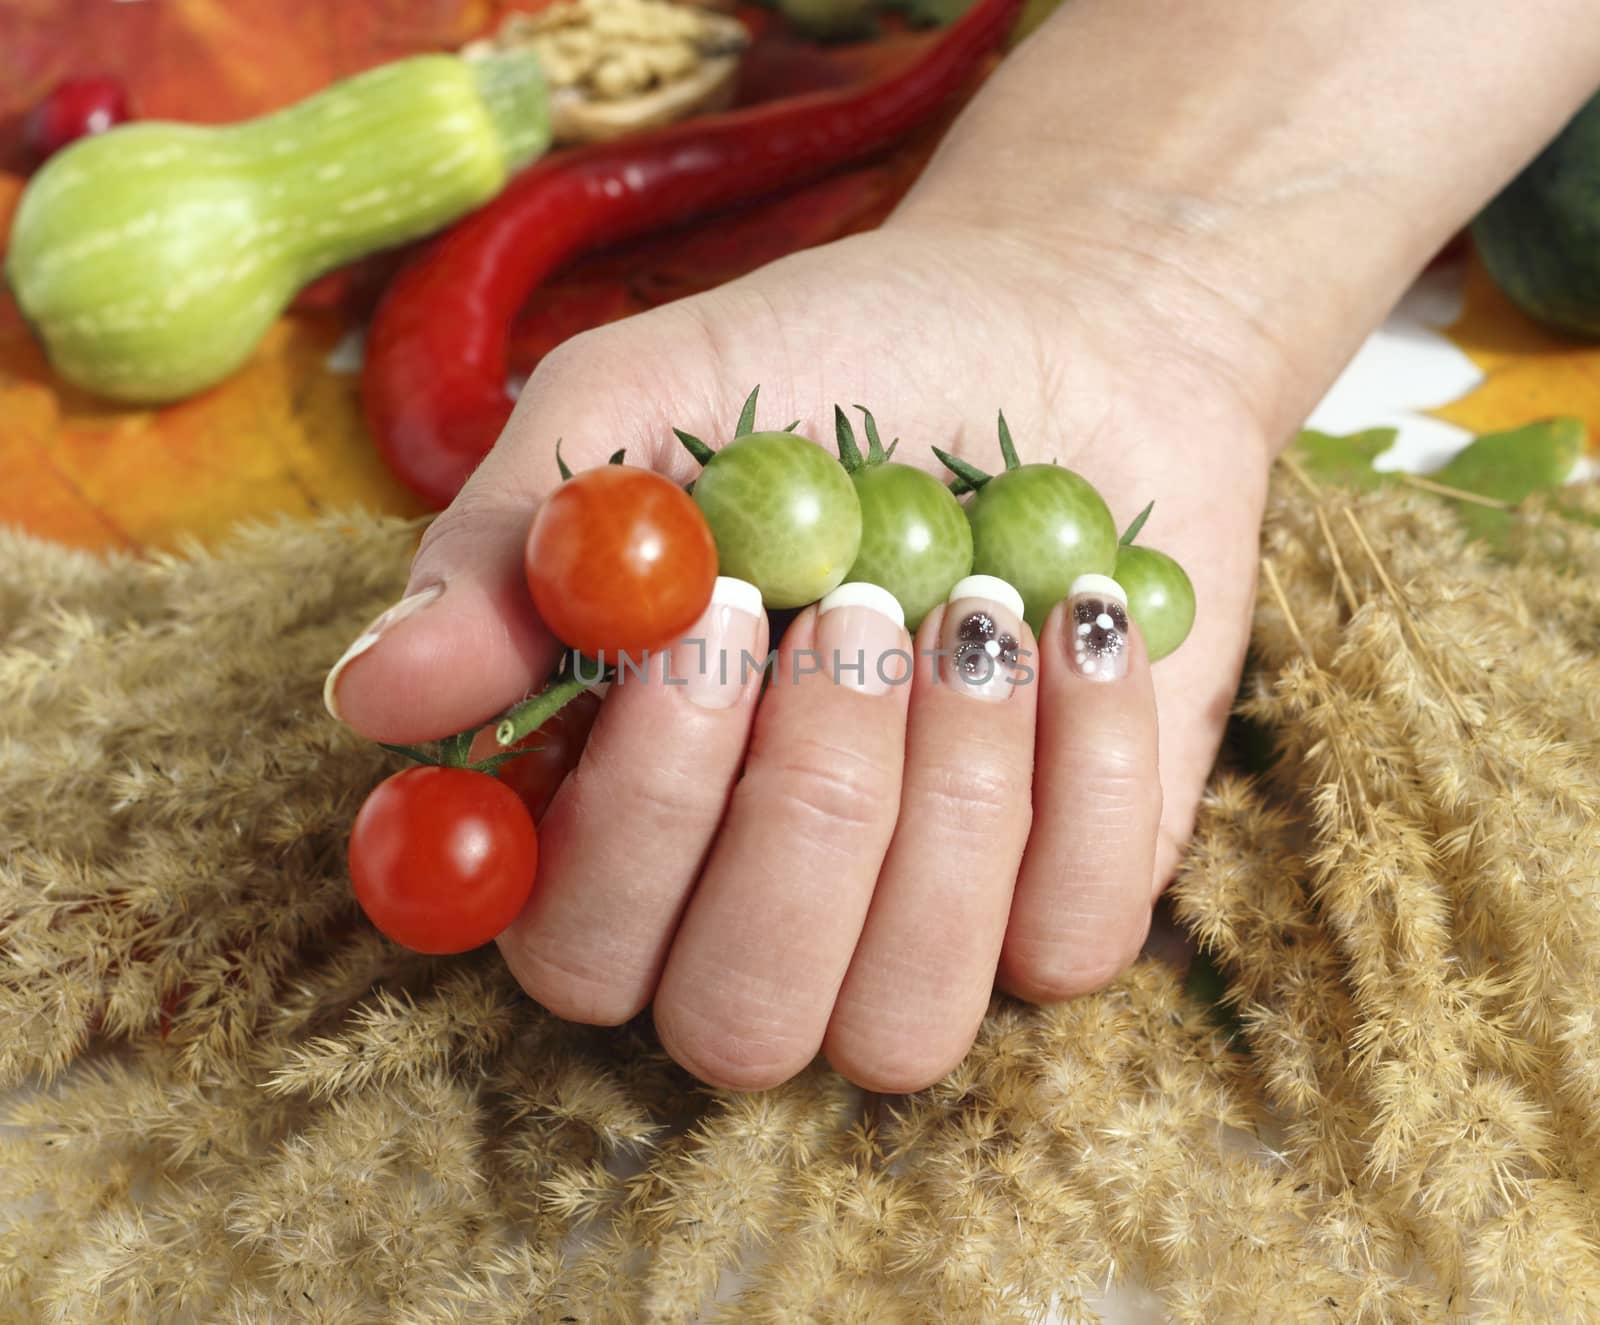 cherry tomatoes and hand of a woman near other vegetables